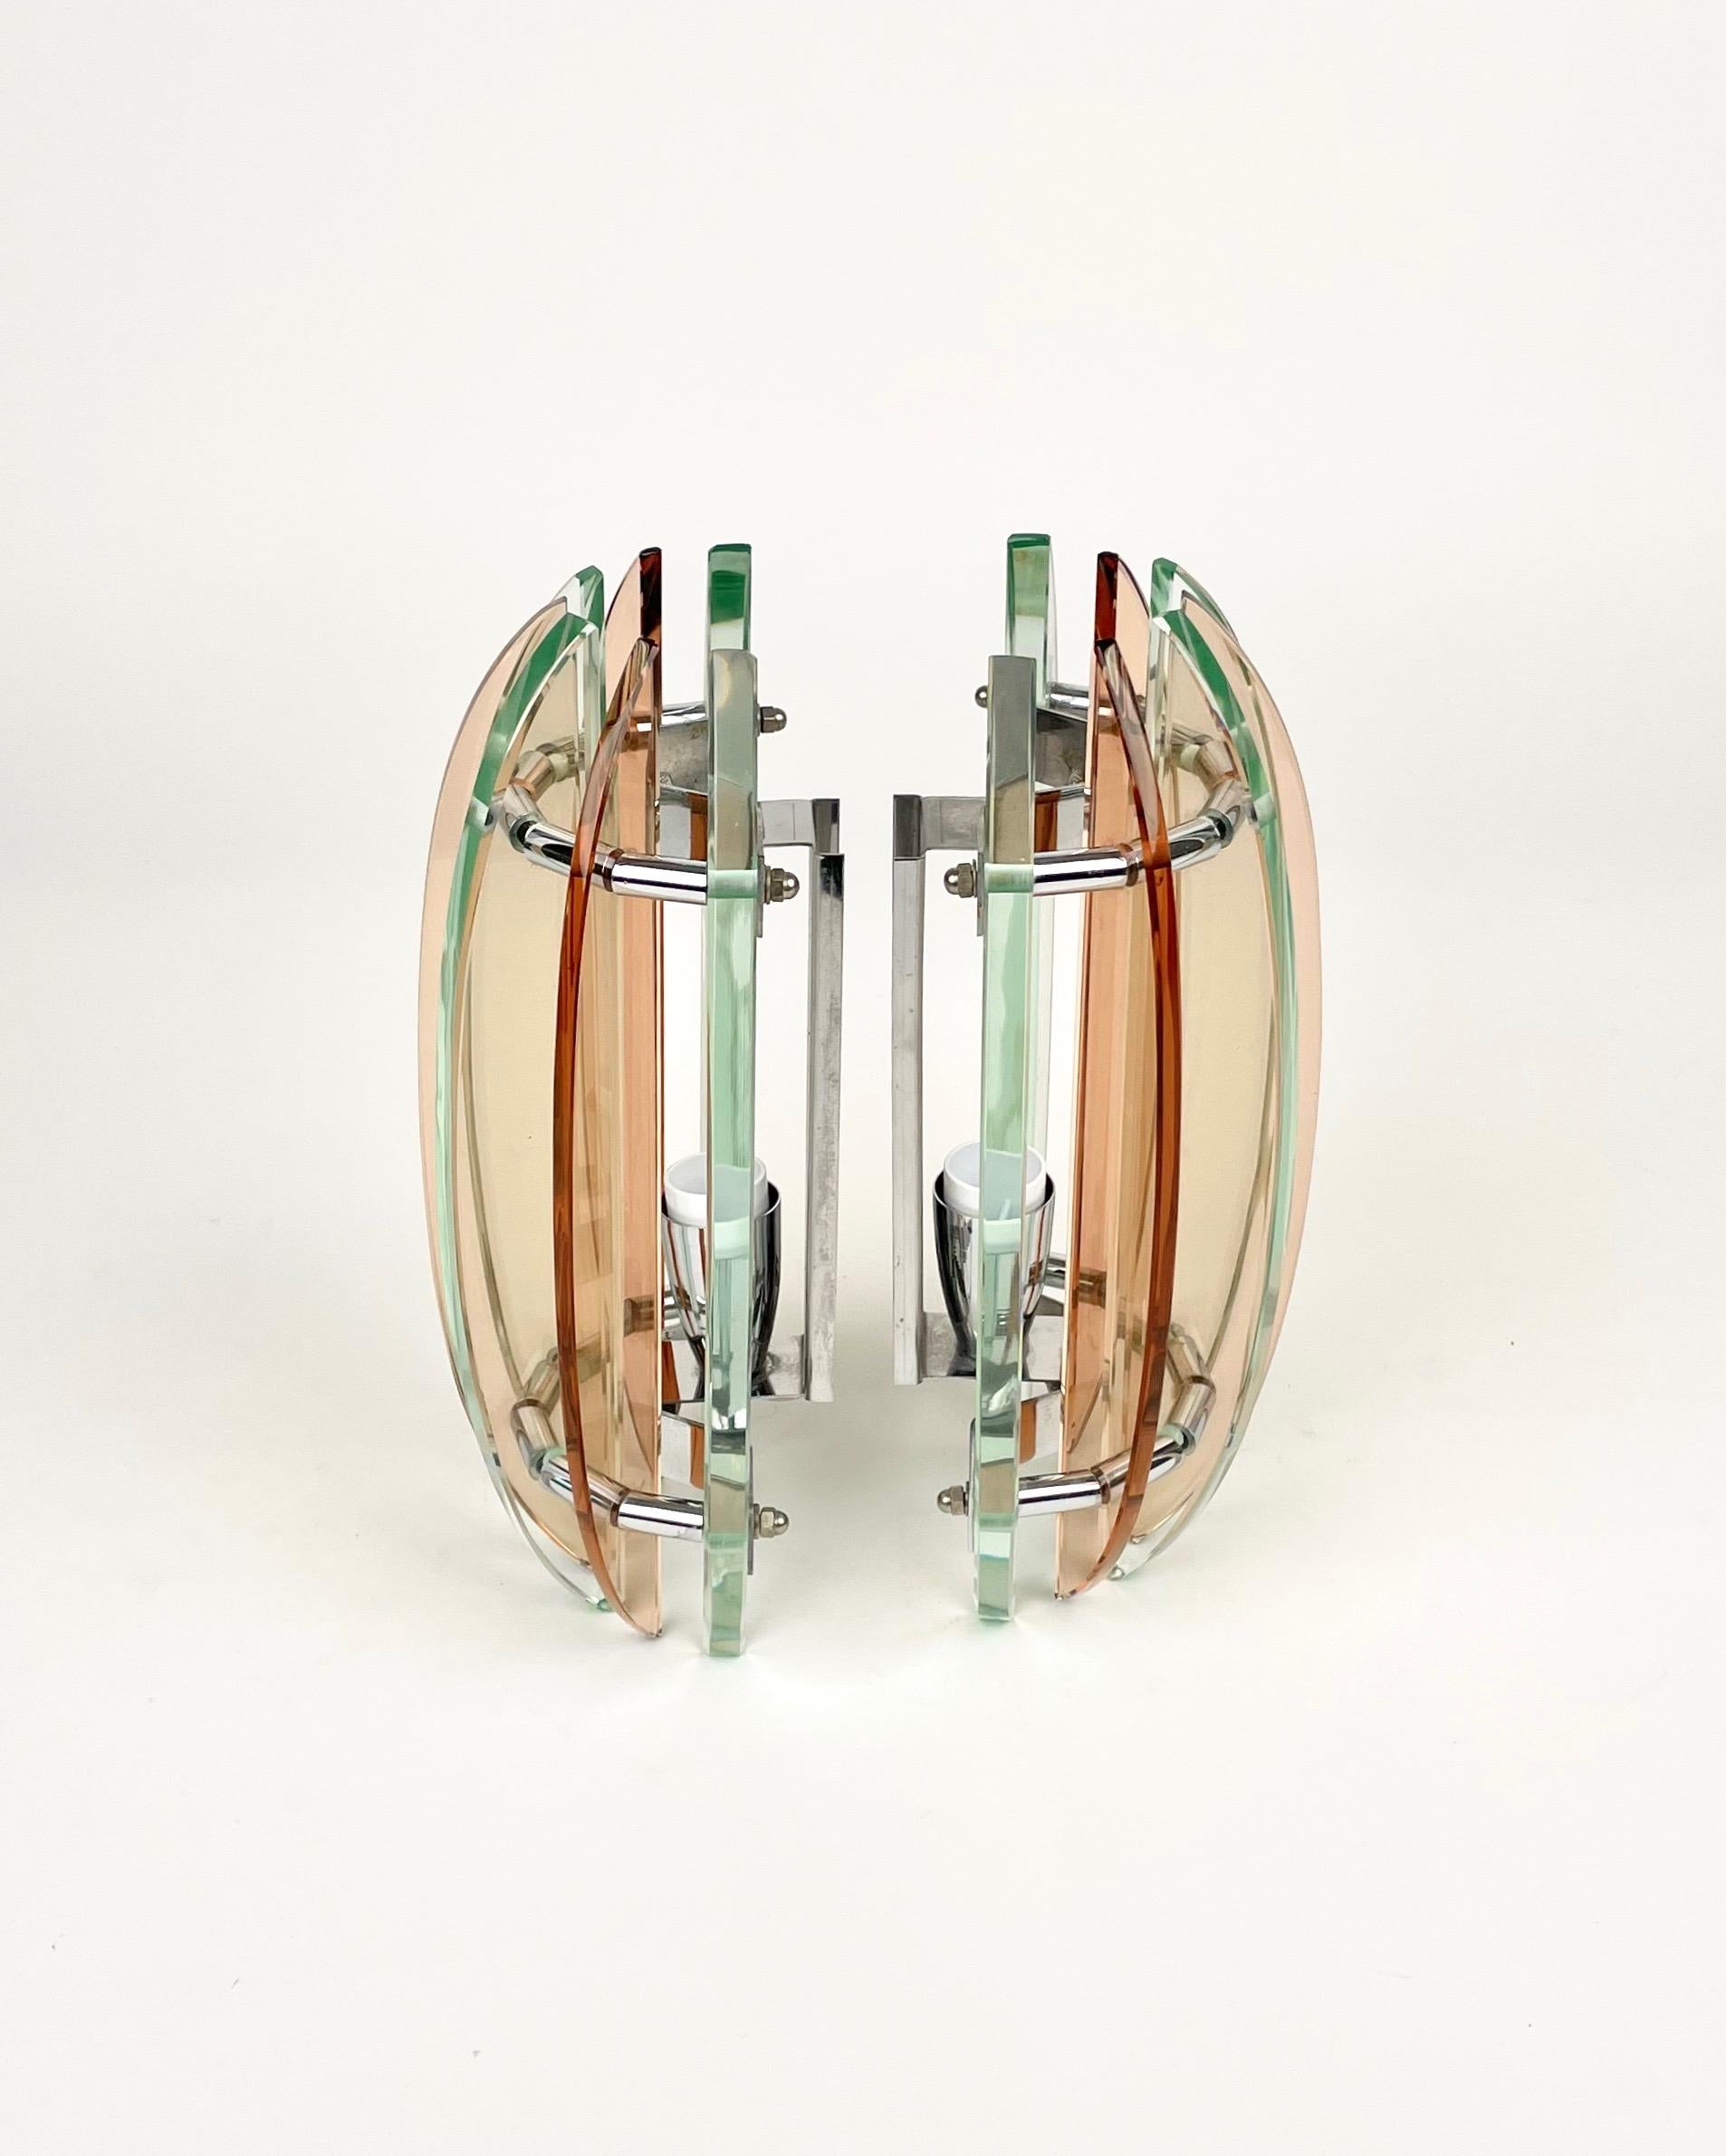 Italian Pair of Wall Sconces in Colored Glass and Chrome by Veca, Italy, 1970s